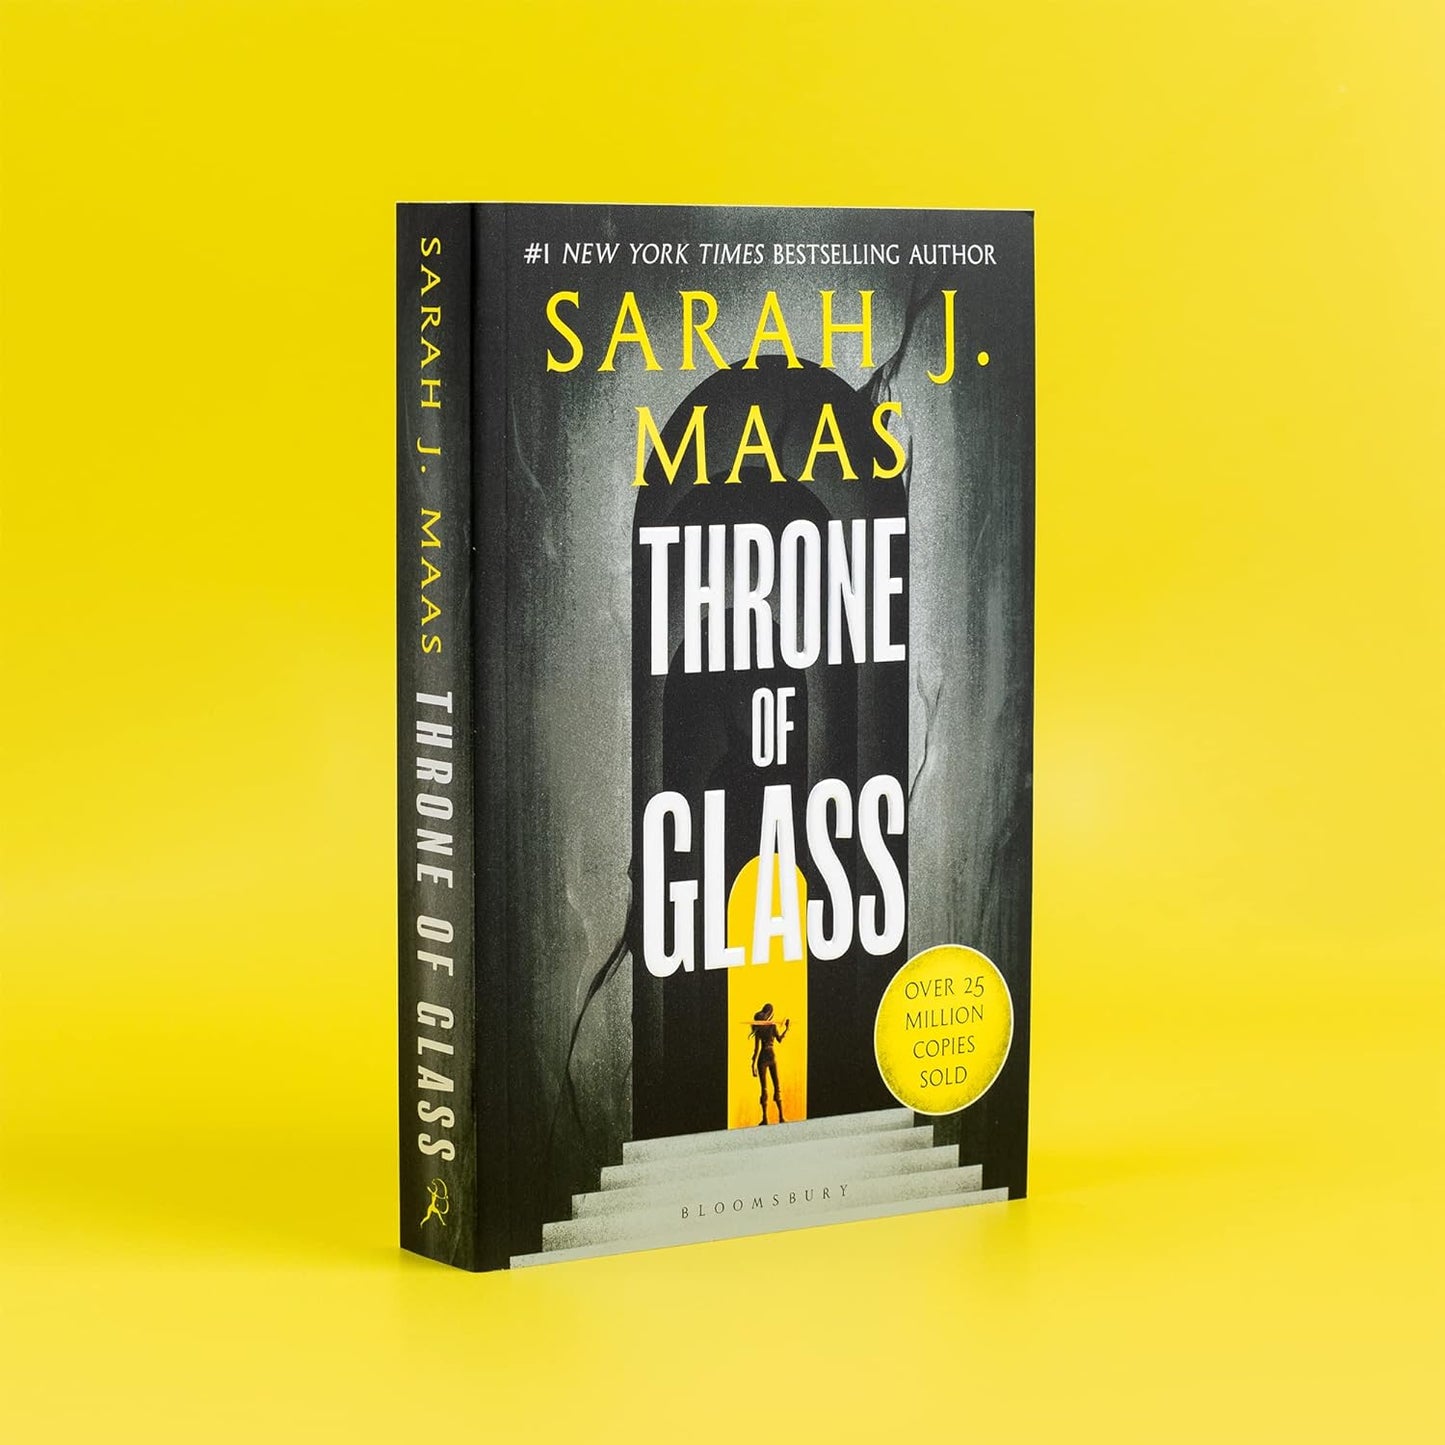 Throne Of Glass: From The # 1 Sunday Times Author Of A Court Of Thorns&Roses